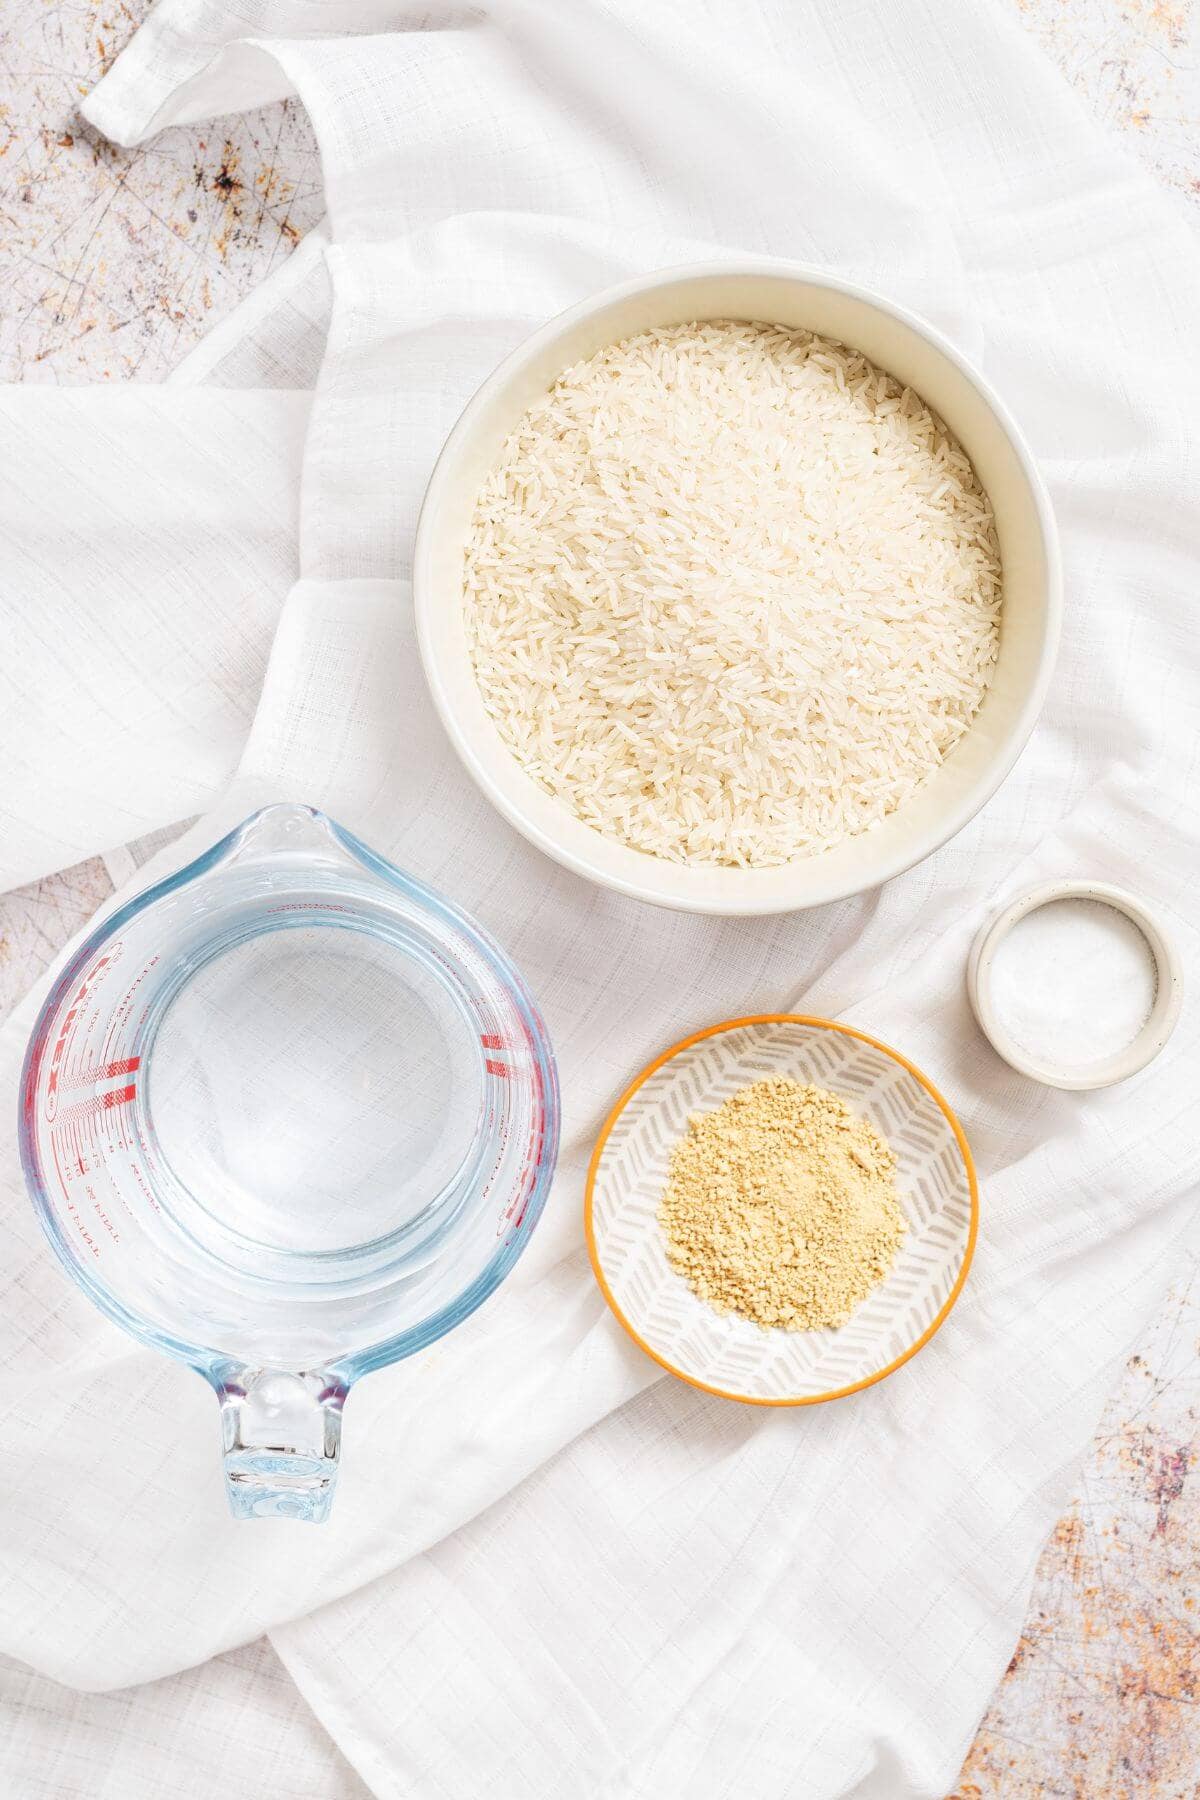 A bowl of rice and a measuring cup with water on a white cloth.